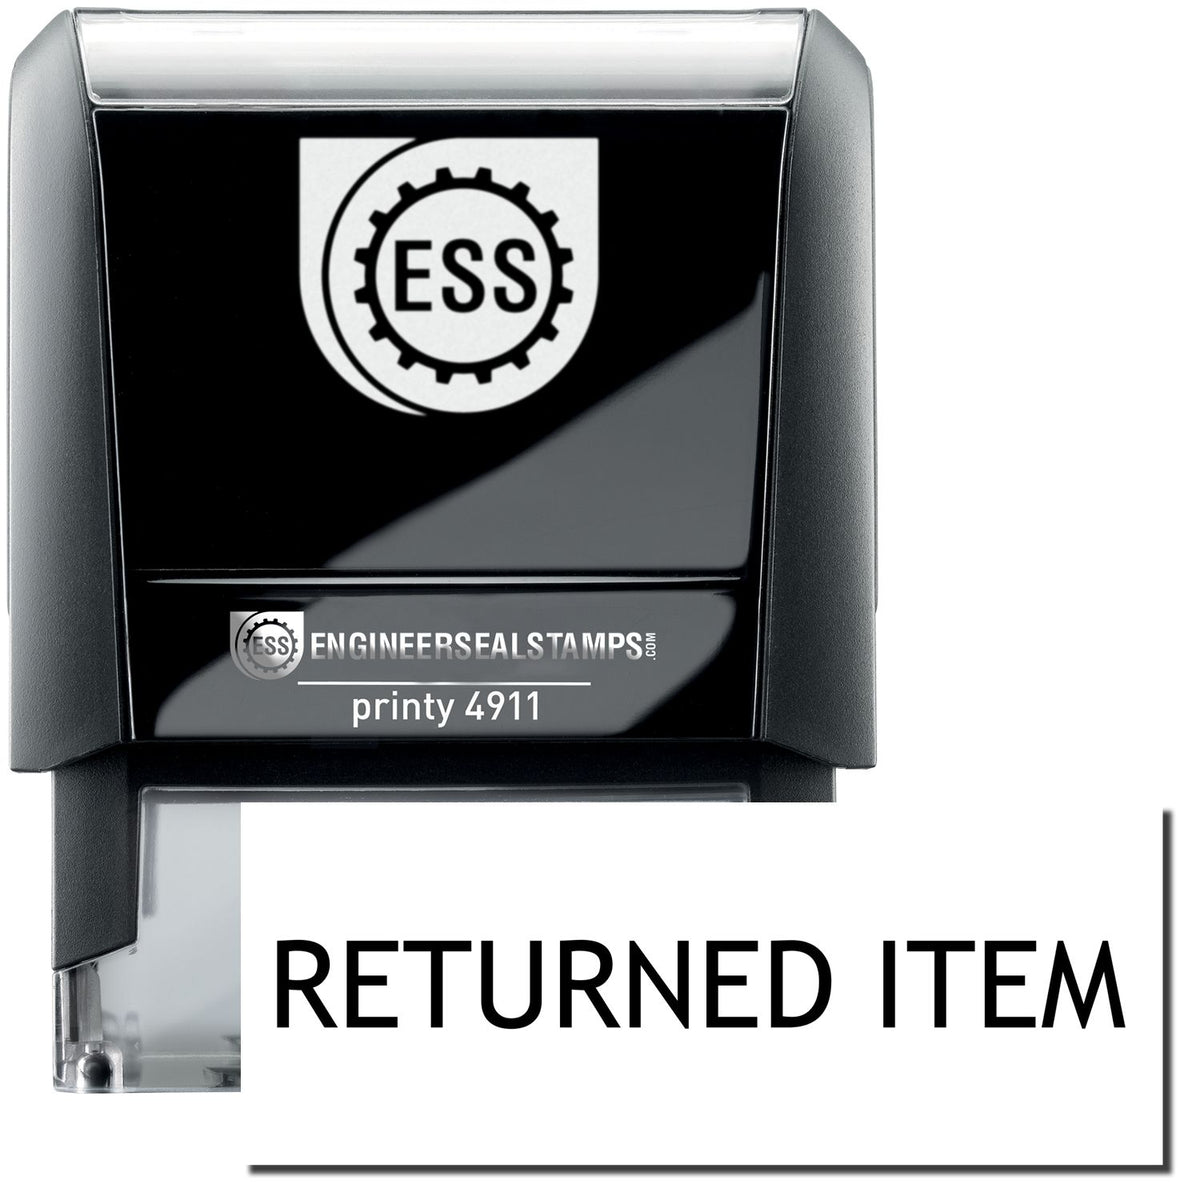 A self-inking stamp with a stamped image showing how the text &quot;RETURNED ITEM&quot; is displayed after stamping.